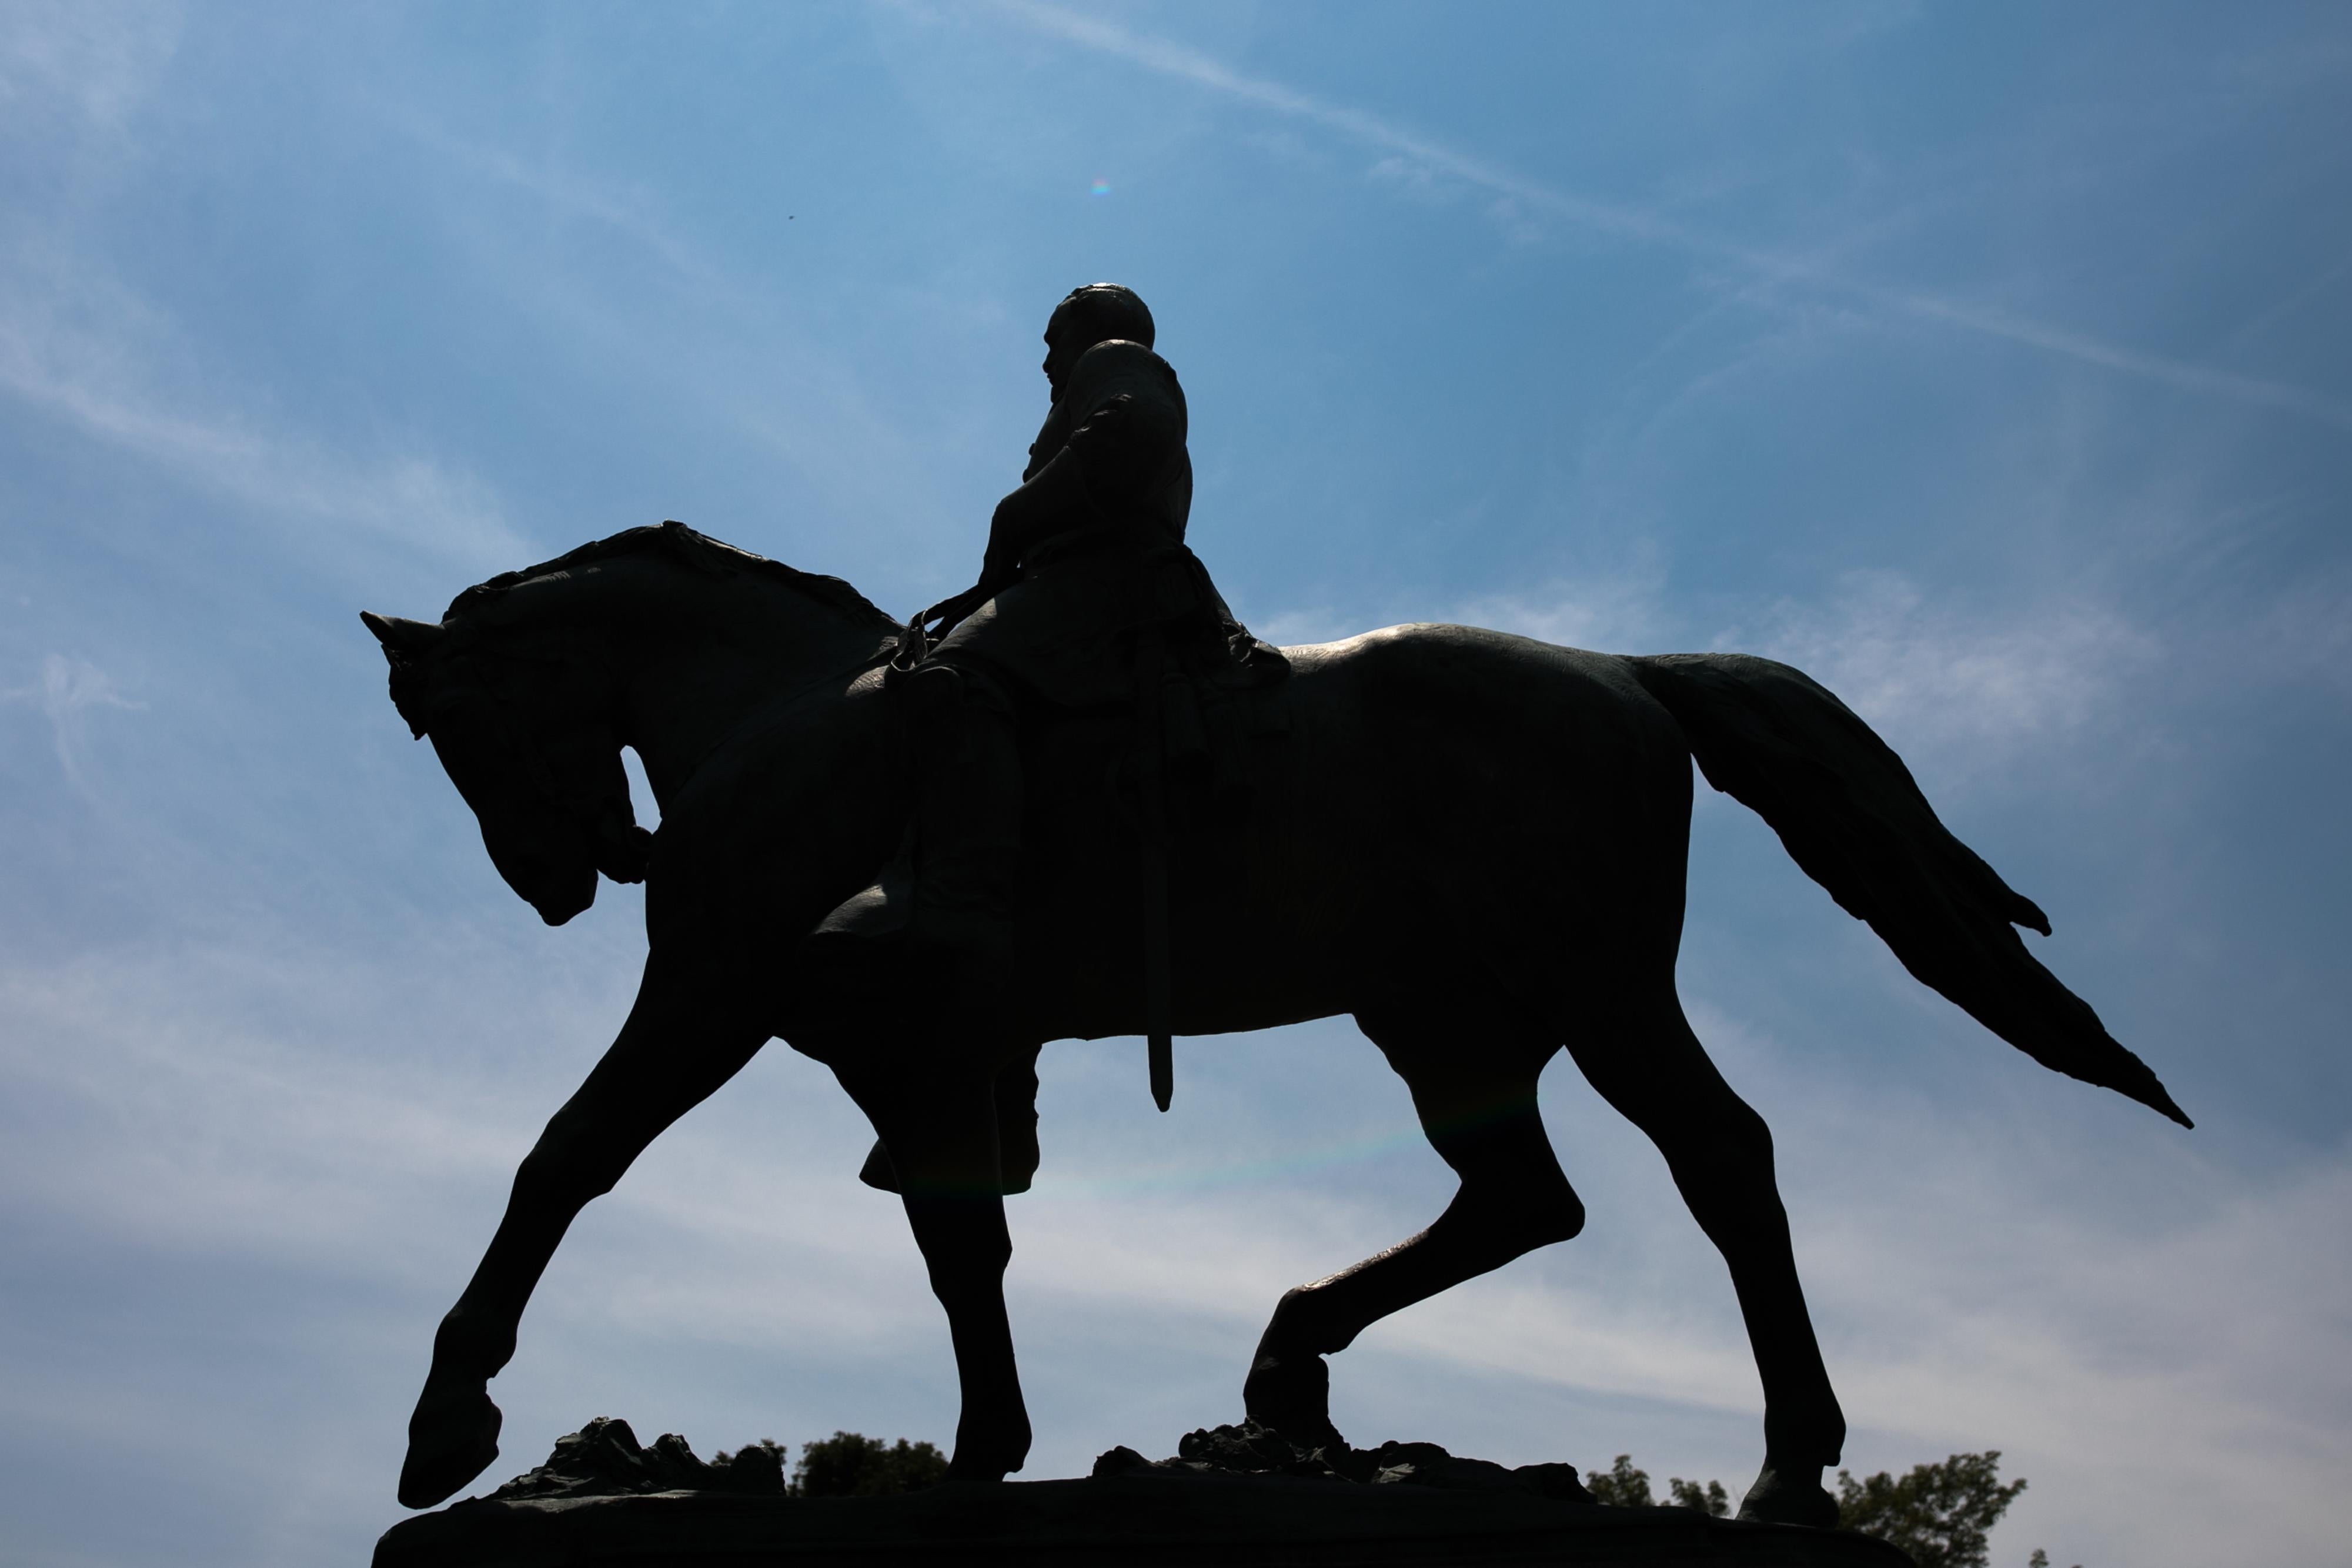 The statue of Robert E Lee on horseback is seen on a bright, sunny day.